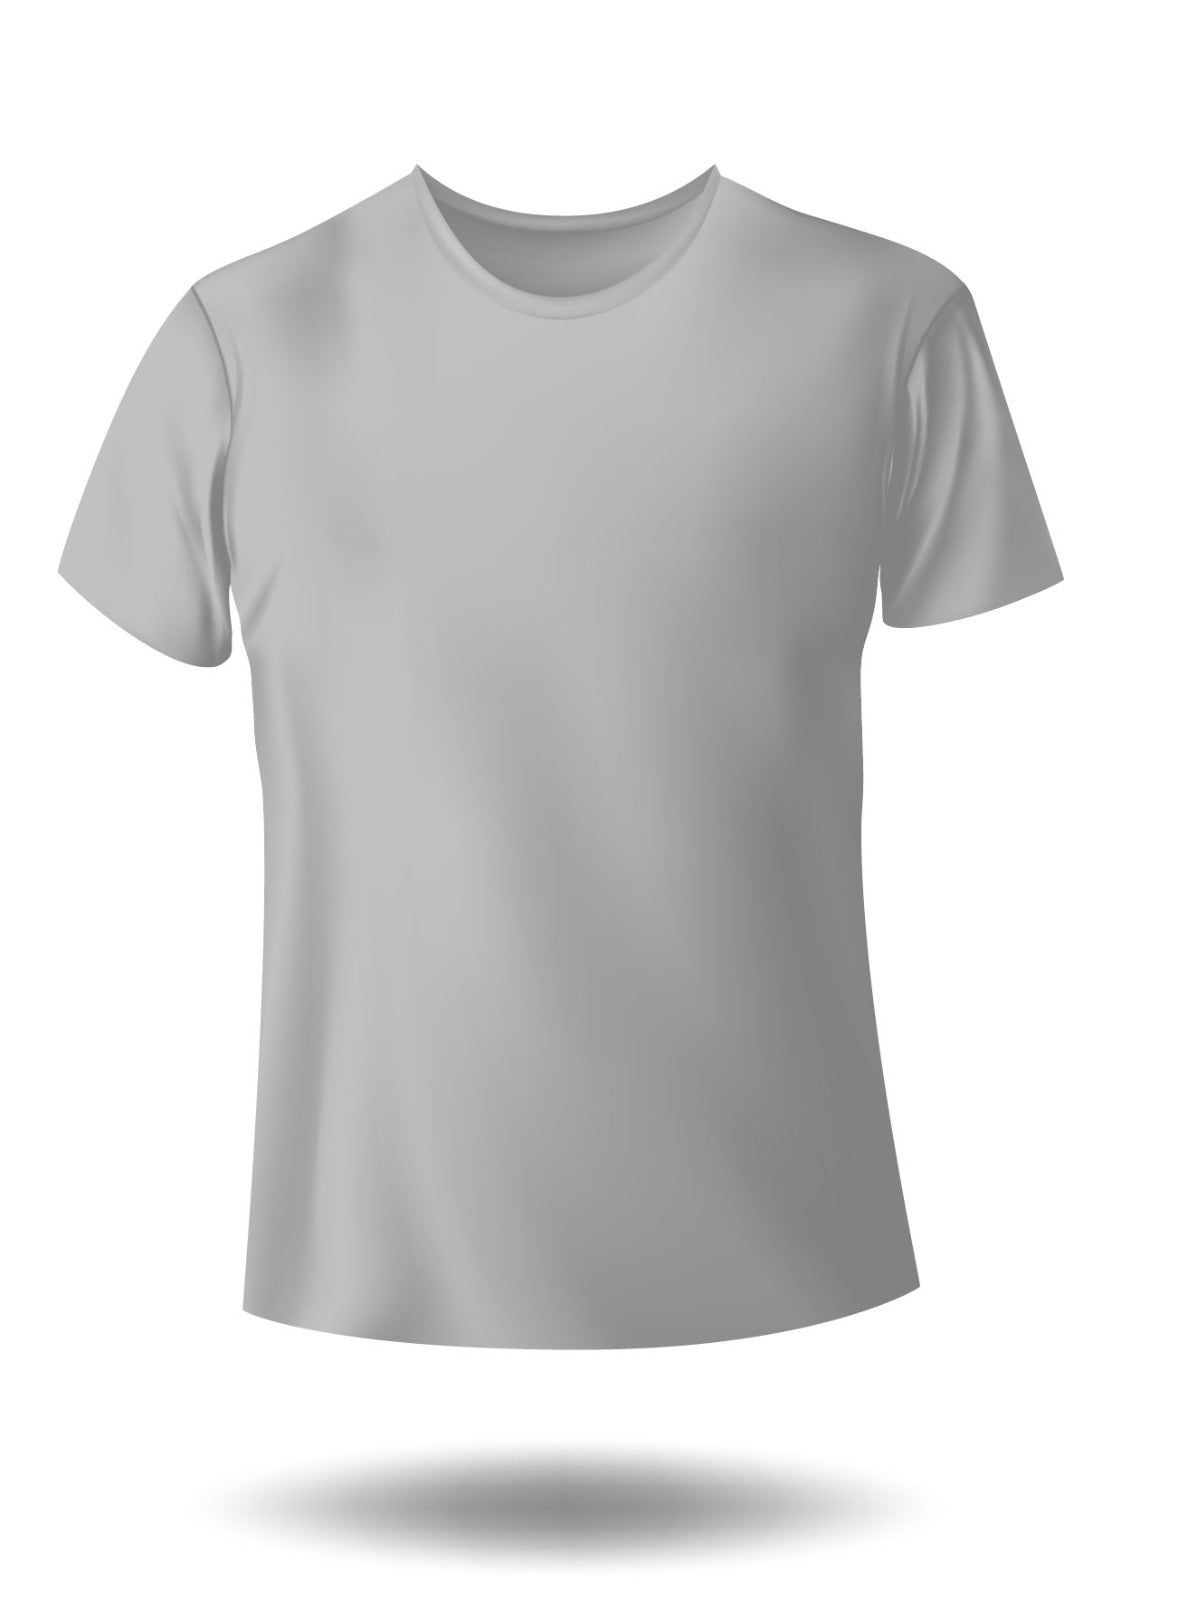 Grey t-shirt 5% for men and women